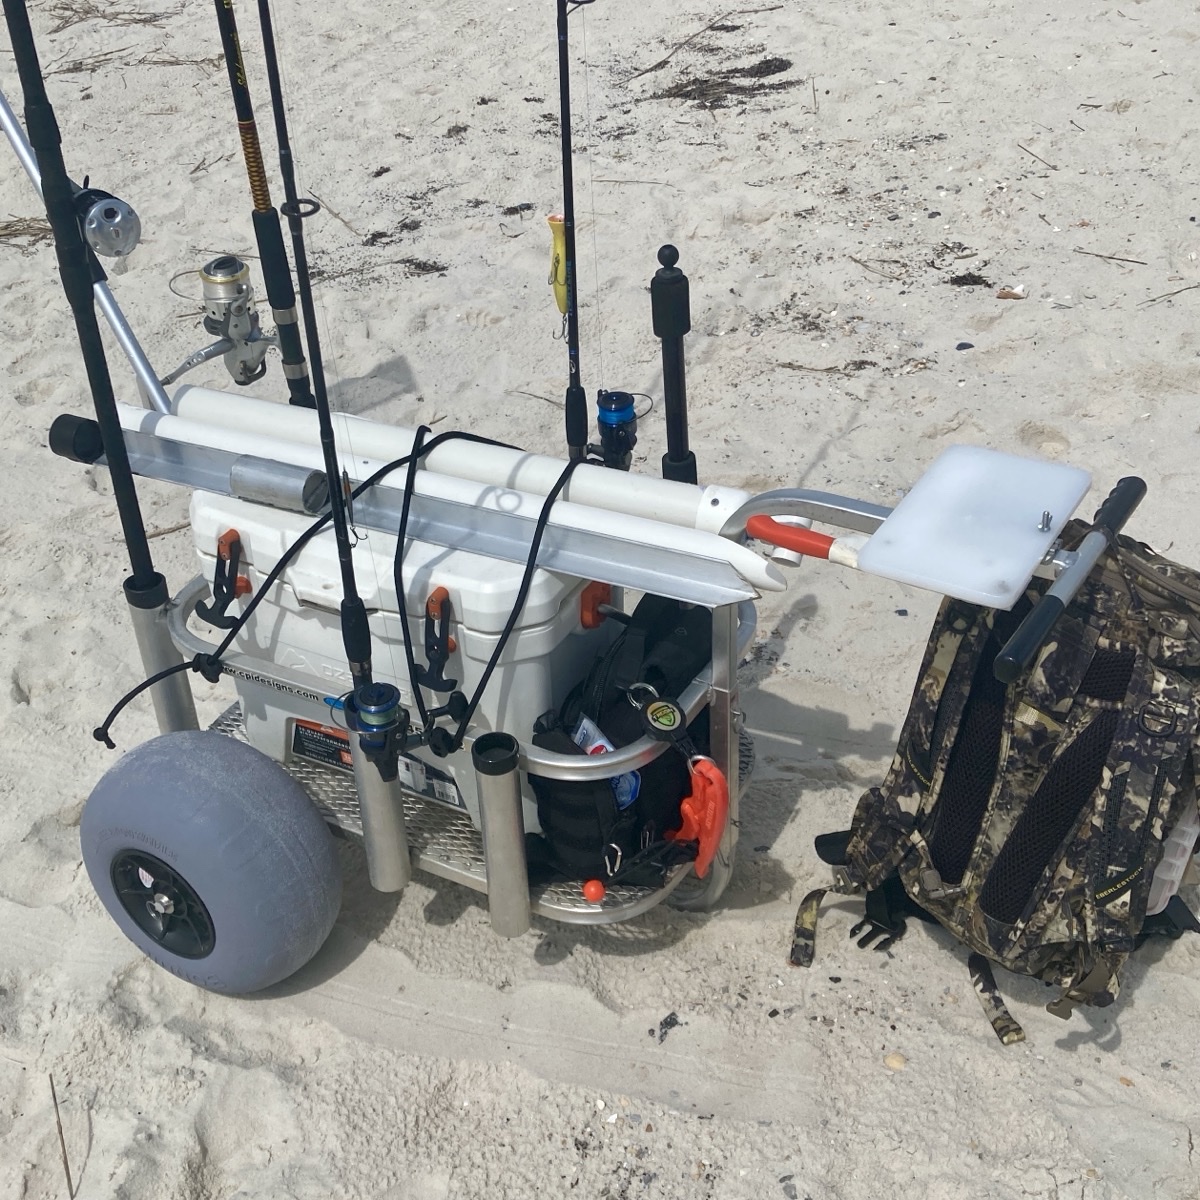 DIY: Trick Out An Aluminum Pull Cart for Fishing the Surf - Reckon